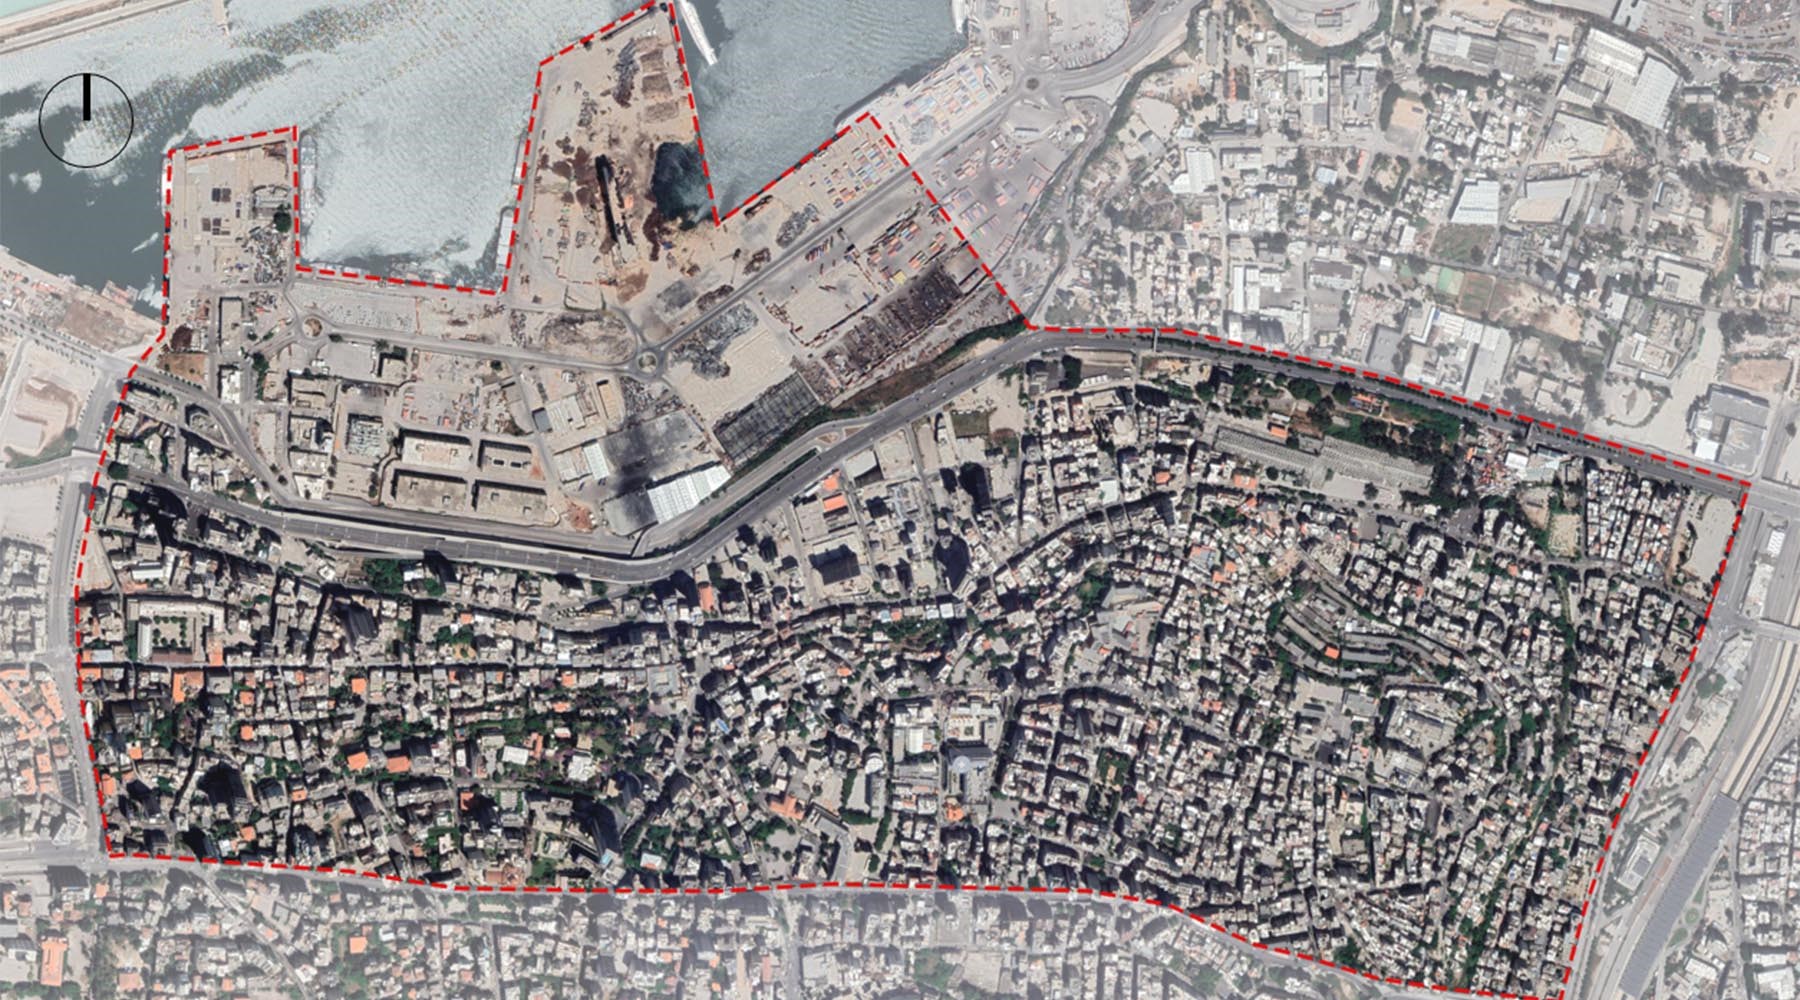 Identifying Cultural Heritage Attributes in Beirut Blast Damaged Areas - Project Summary